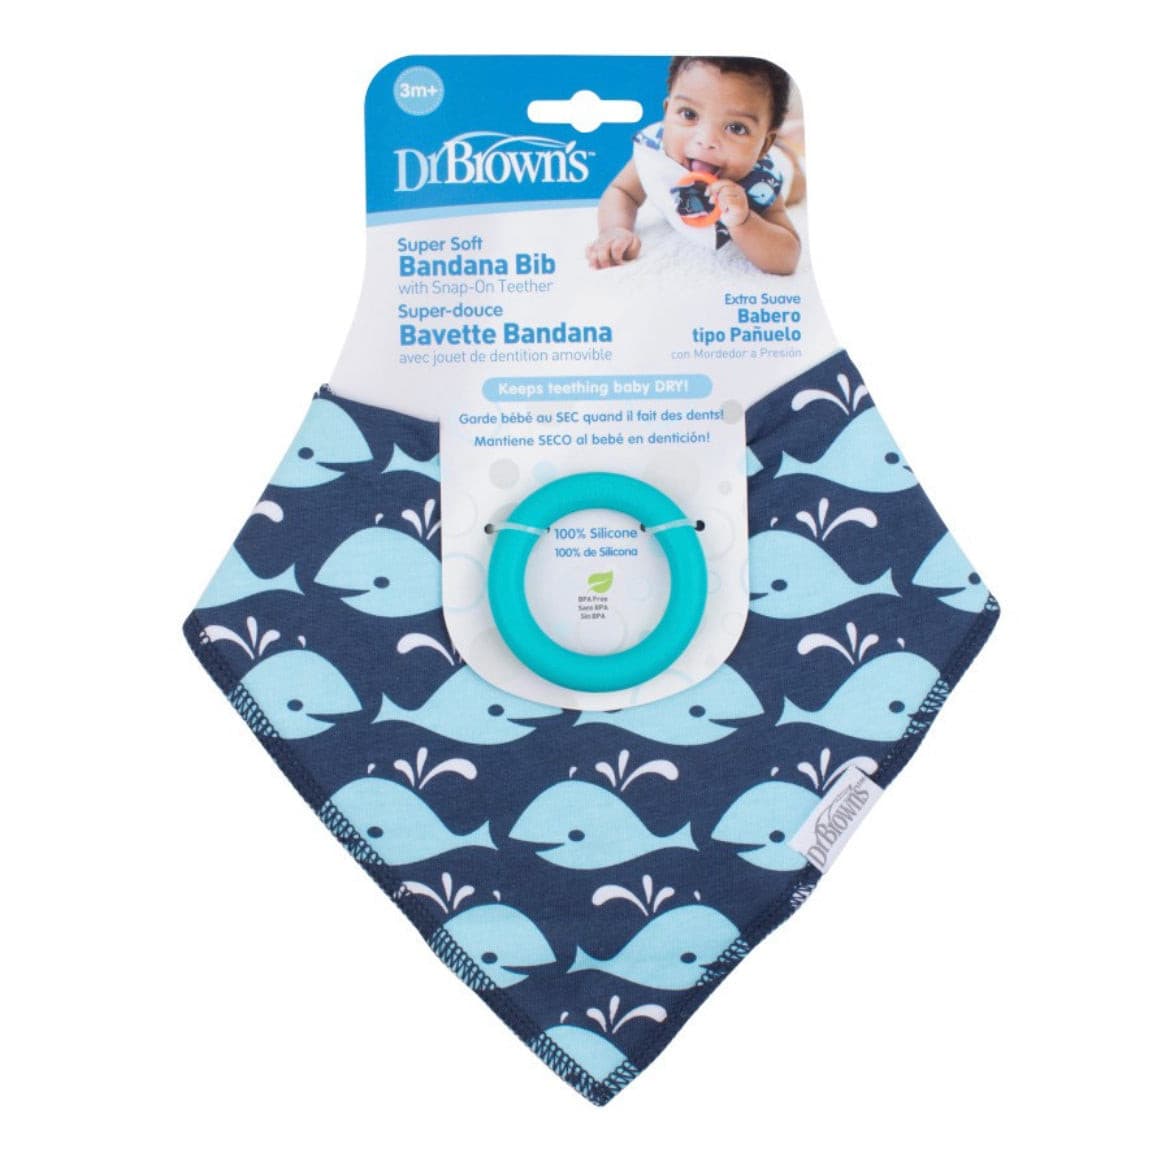 Bandana Bib with Teether by Dr. Brown.